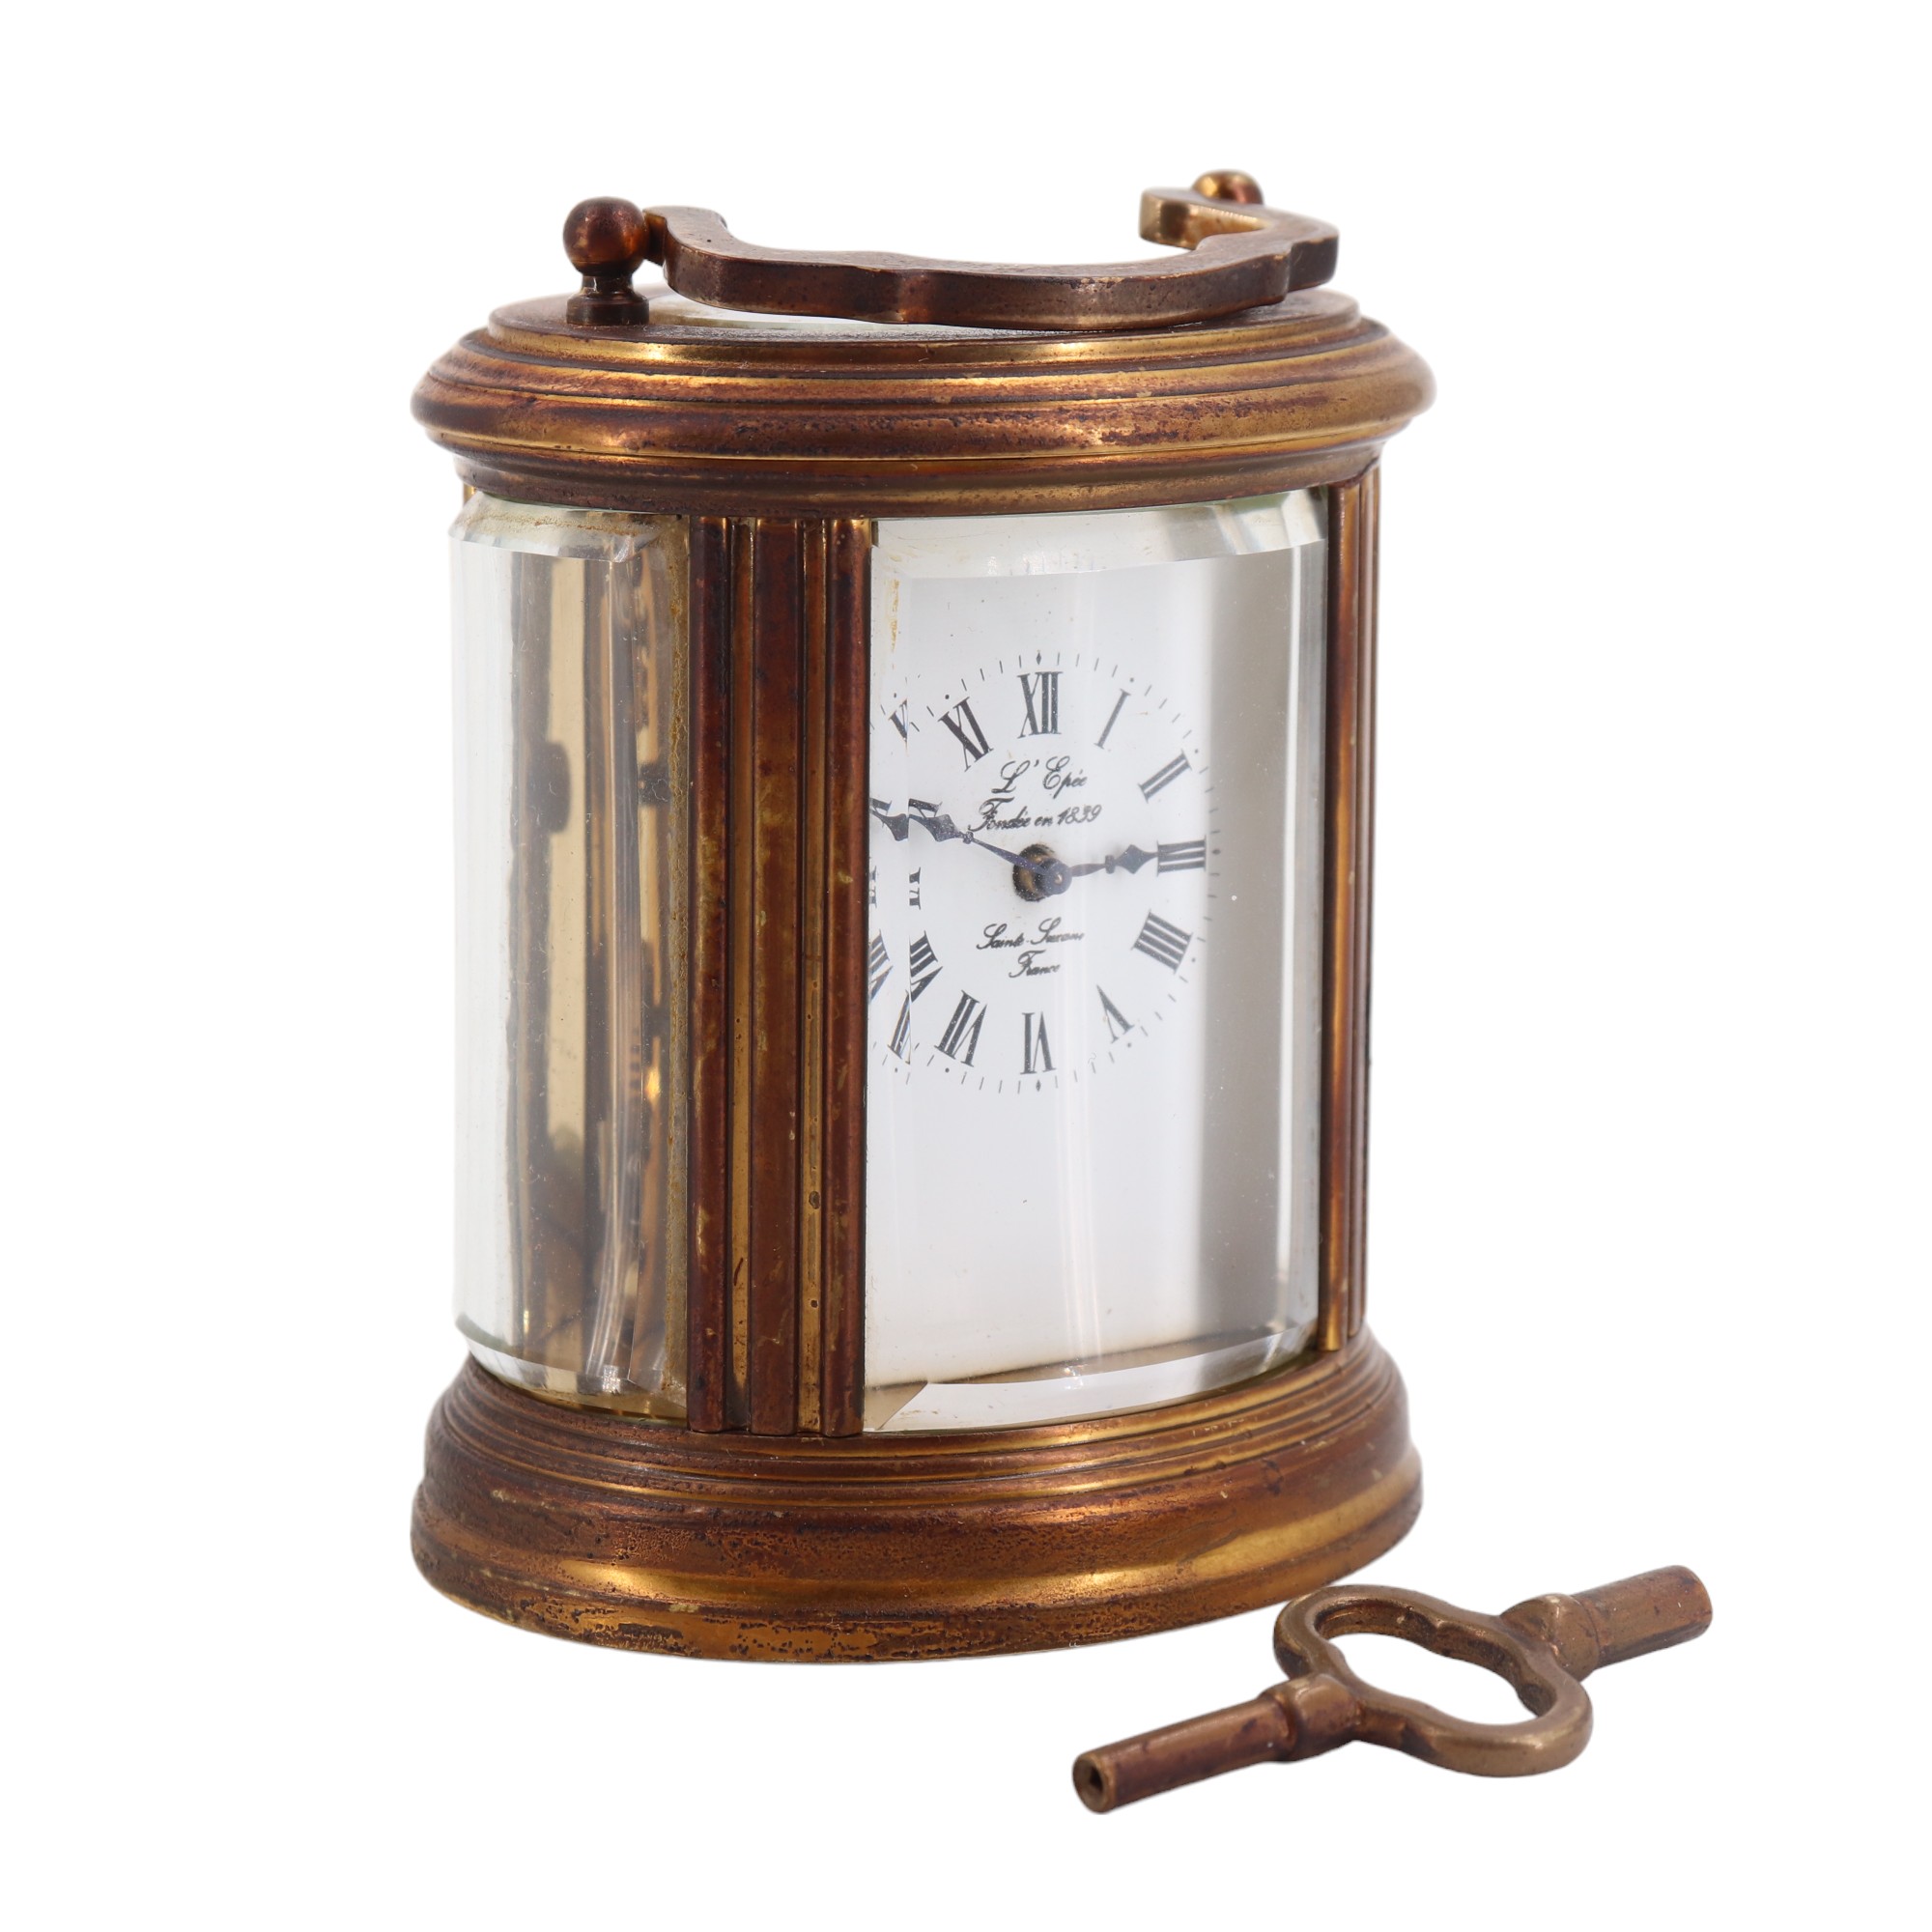 A late 20th Century French L'Epee brass carriage clock, having a key-wound 11-jewel movement, with